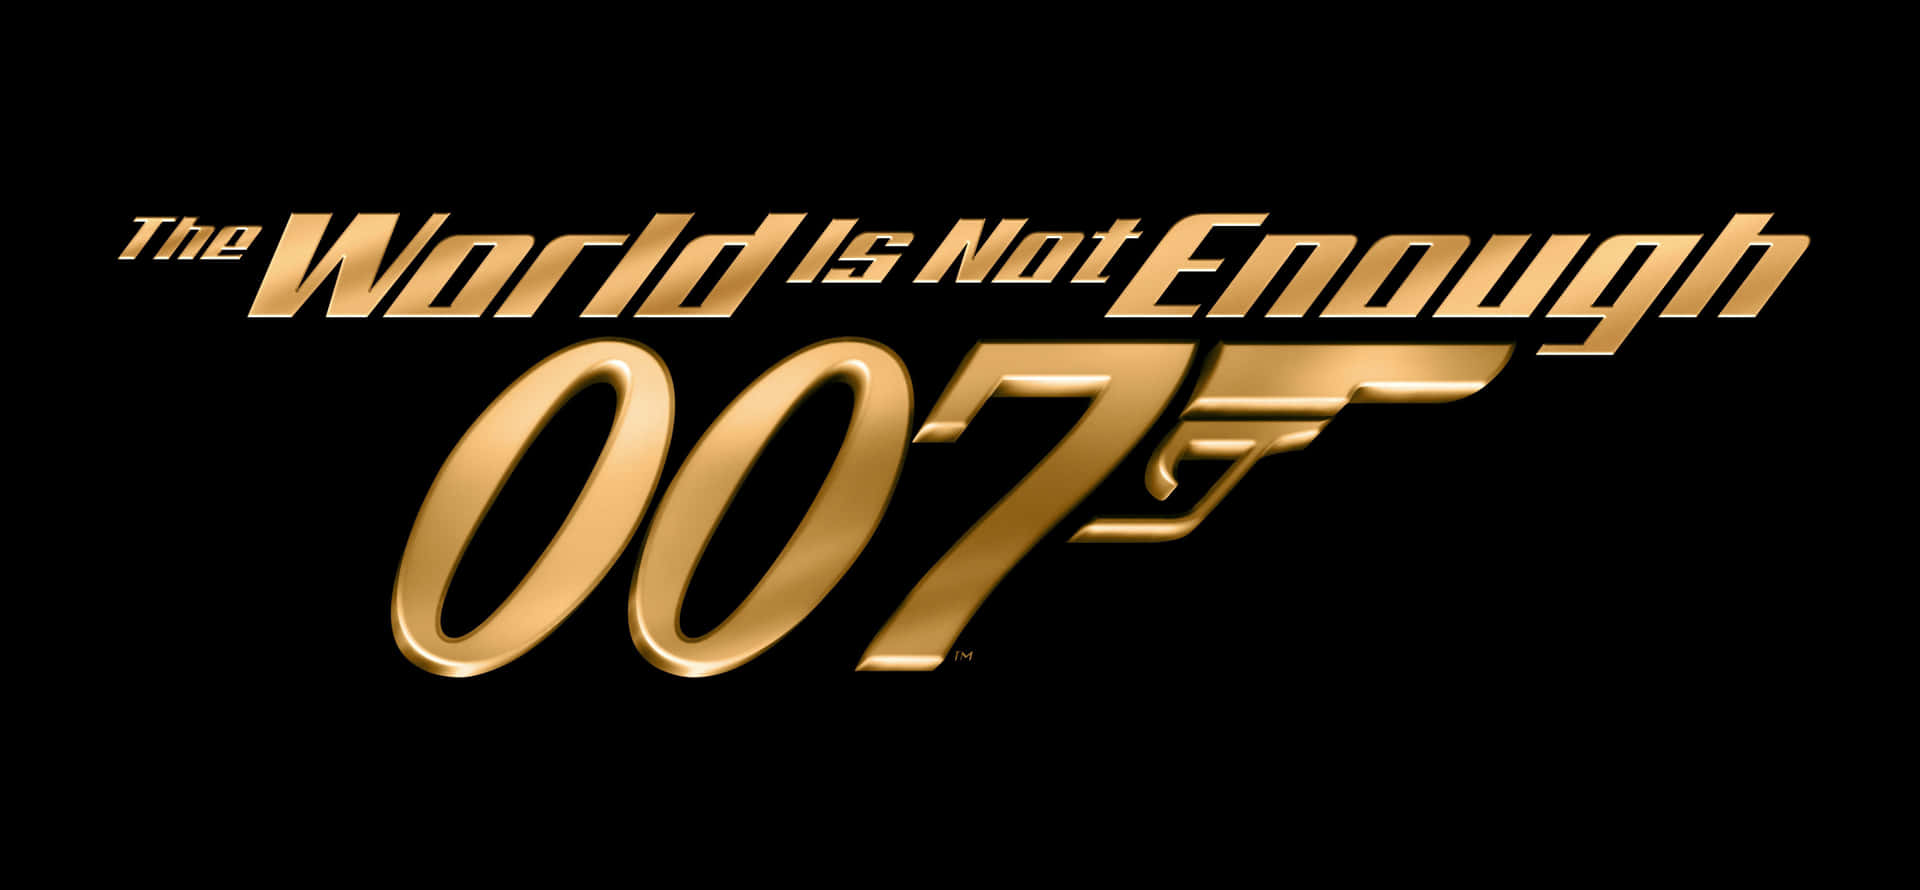 James Bond The World Is Not Enough Title Wallpaper